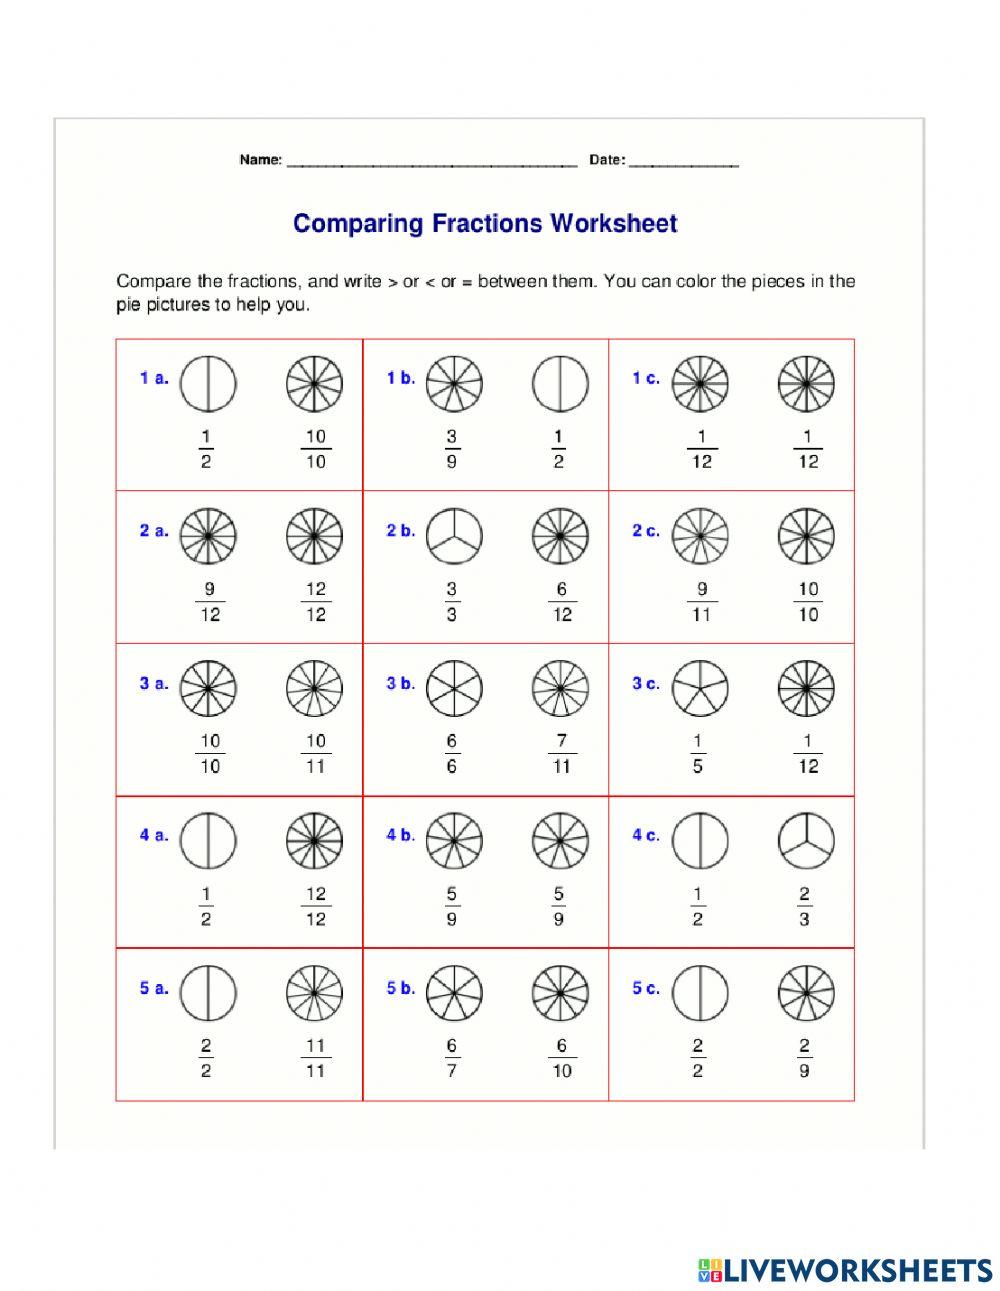 Comparing fractions picture only